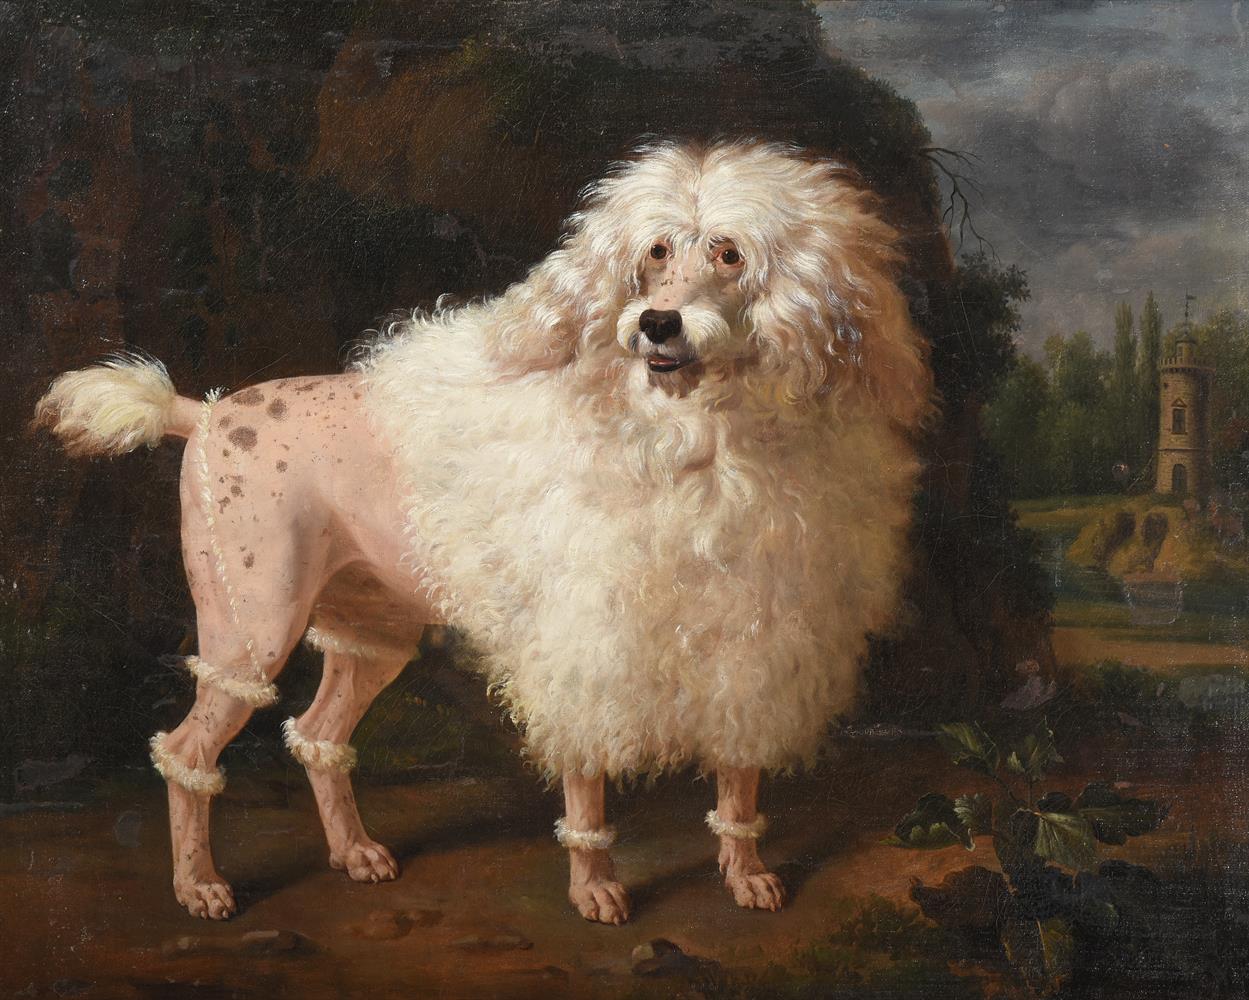 CIRCLE OF JEAN-BAPTISTE OUDRY (FRENCH 1686-1755), PORTRAIT OF A POODLE - Image 2 of 3